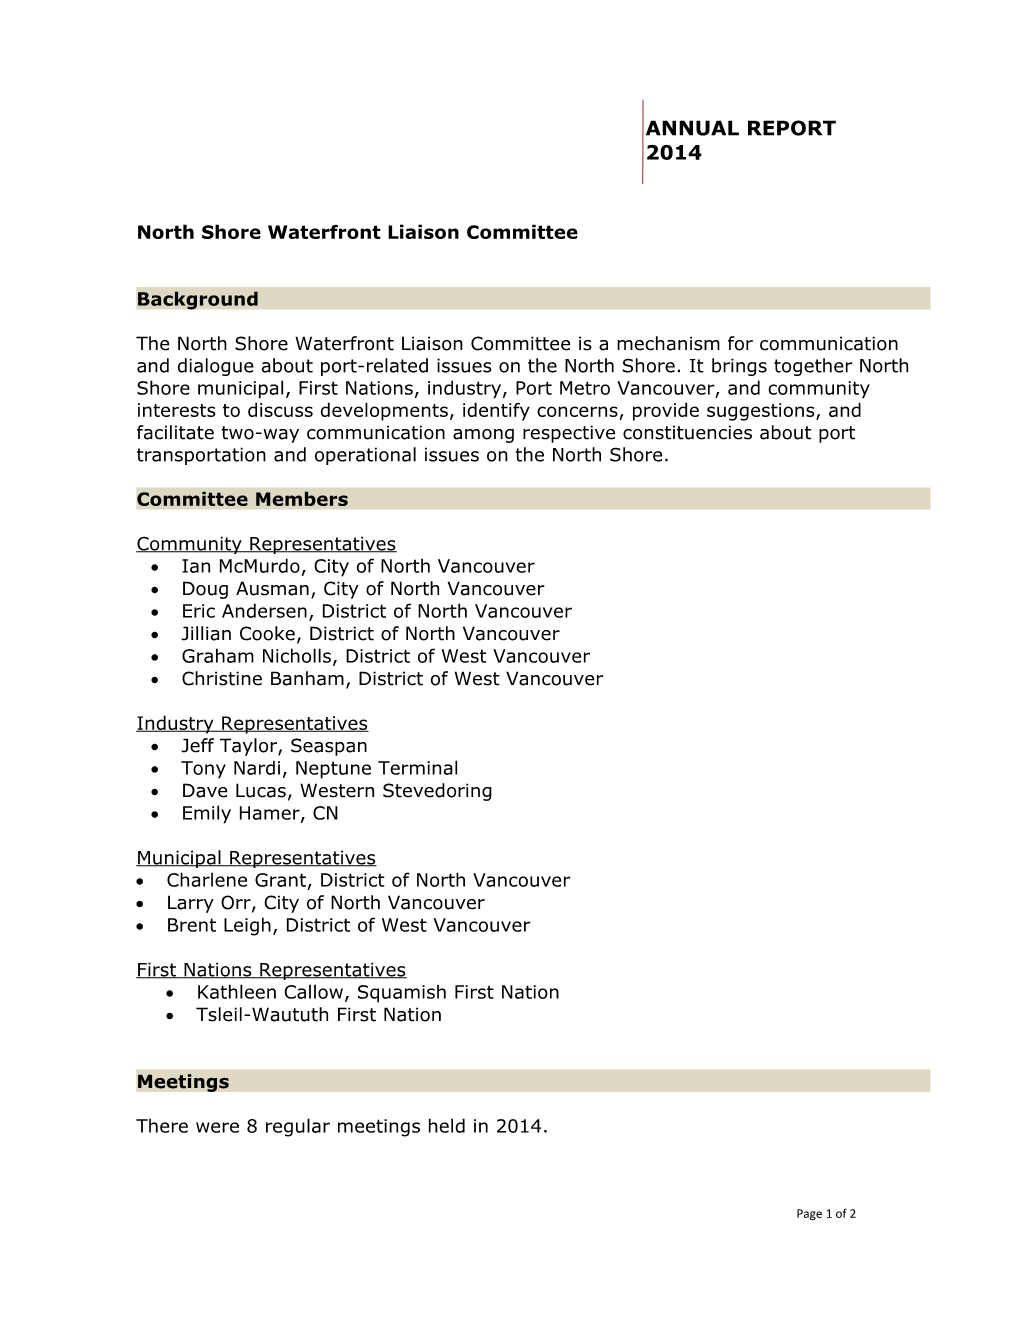 North Shore Waterfront Liaison Committee Annual Report 2014